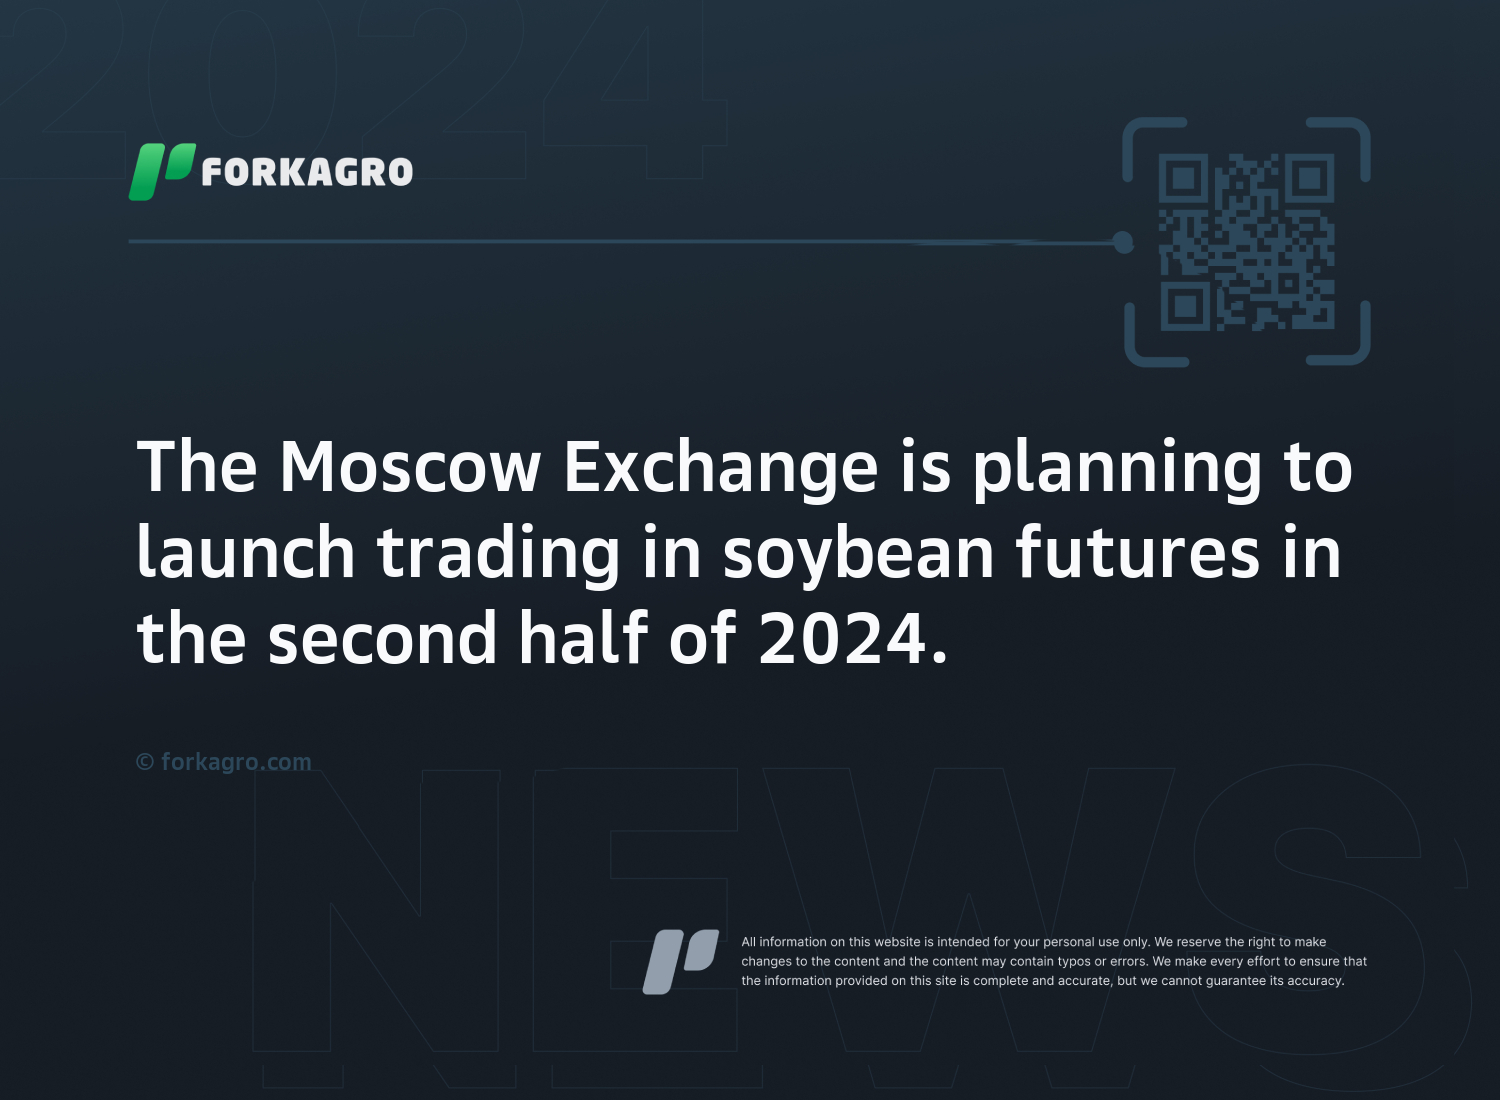 The Moscow Exchange is planning to launch trading in soybean futures in the second half of 2024.